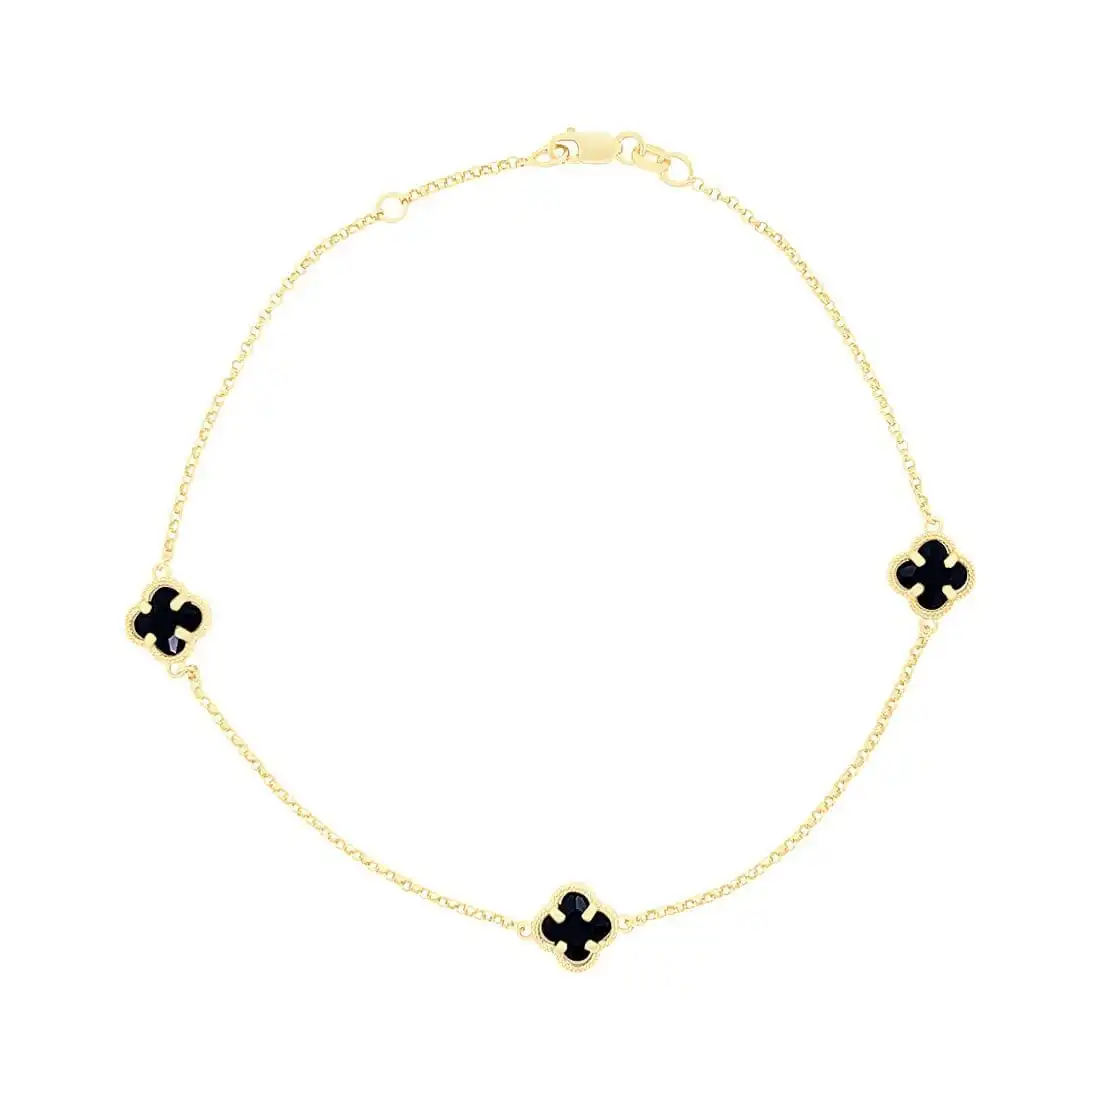 Black Clover Anklet in 9ct Yellow Gold Silver Infused